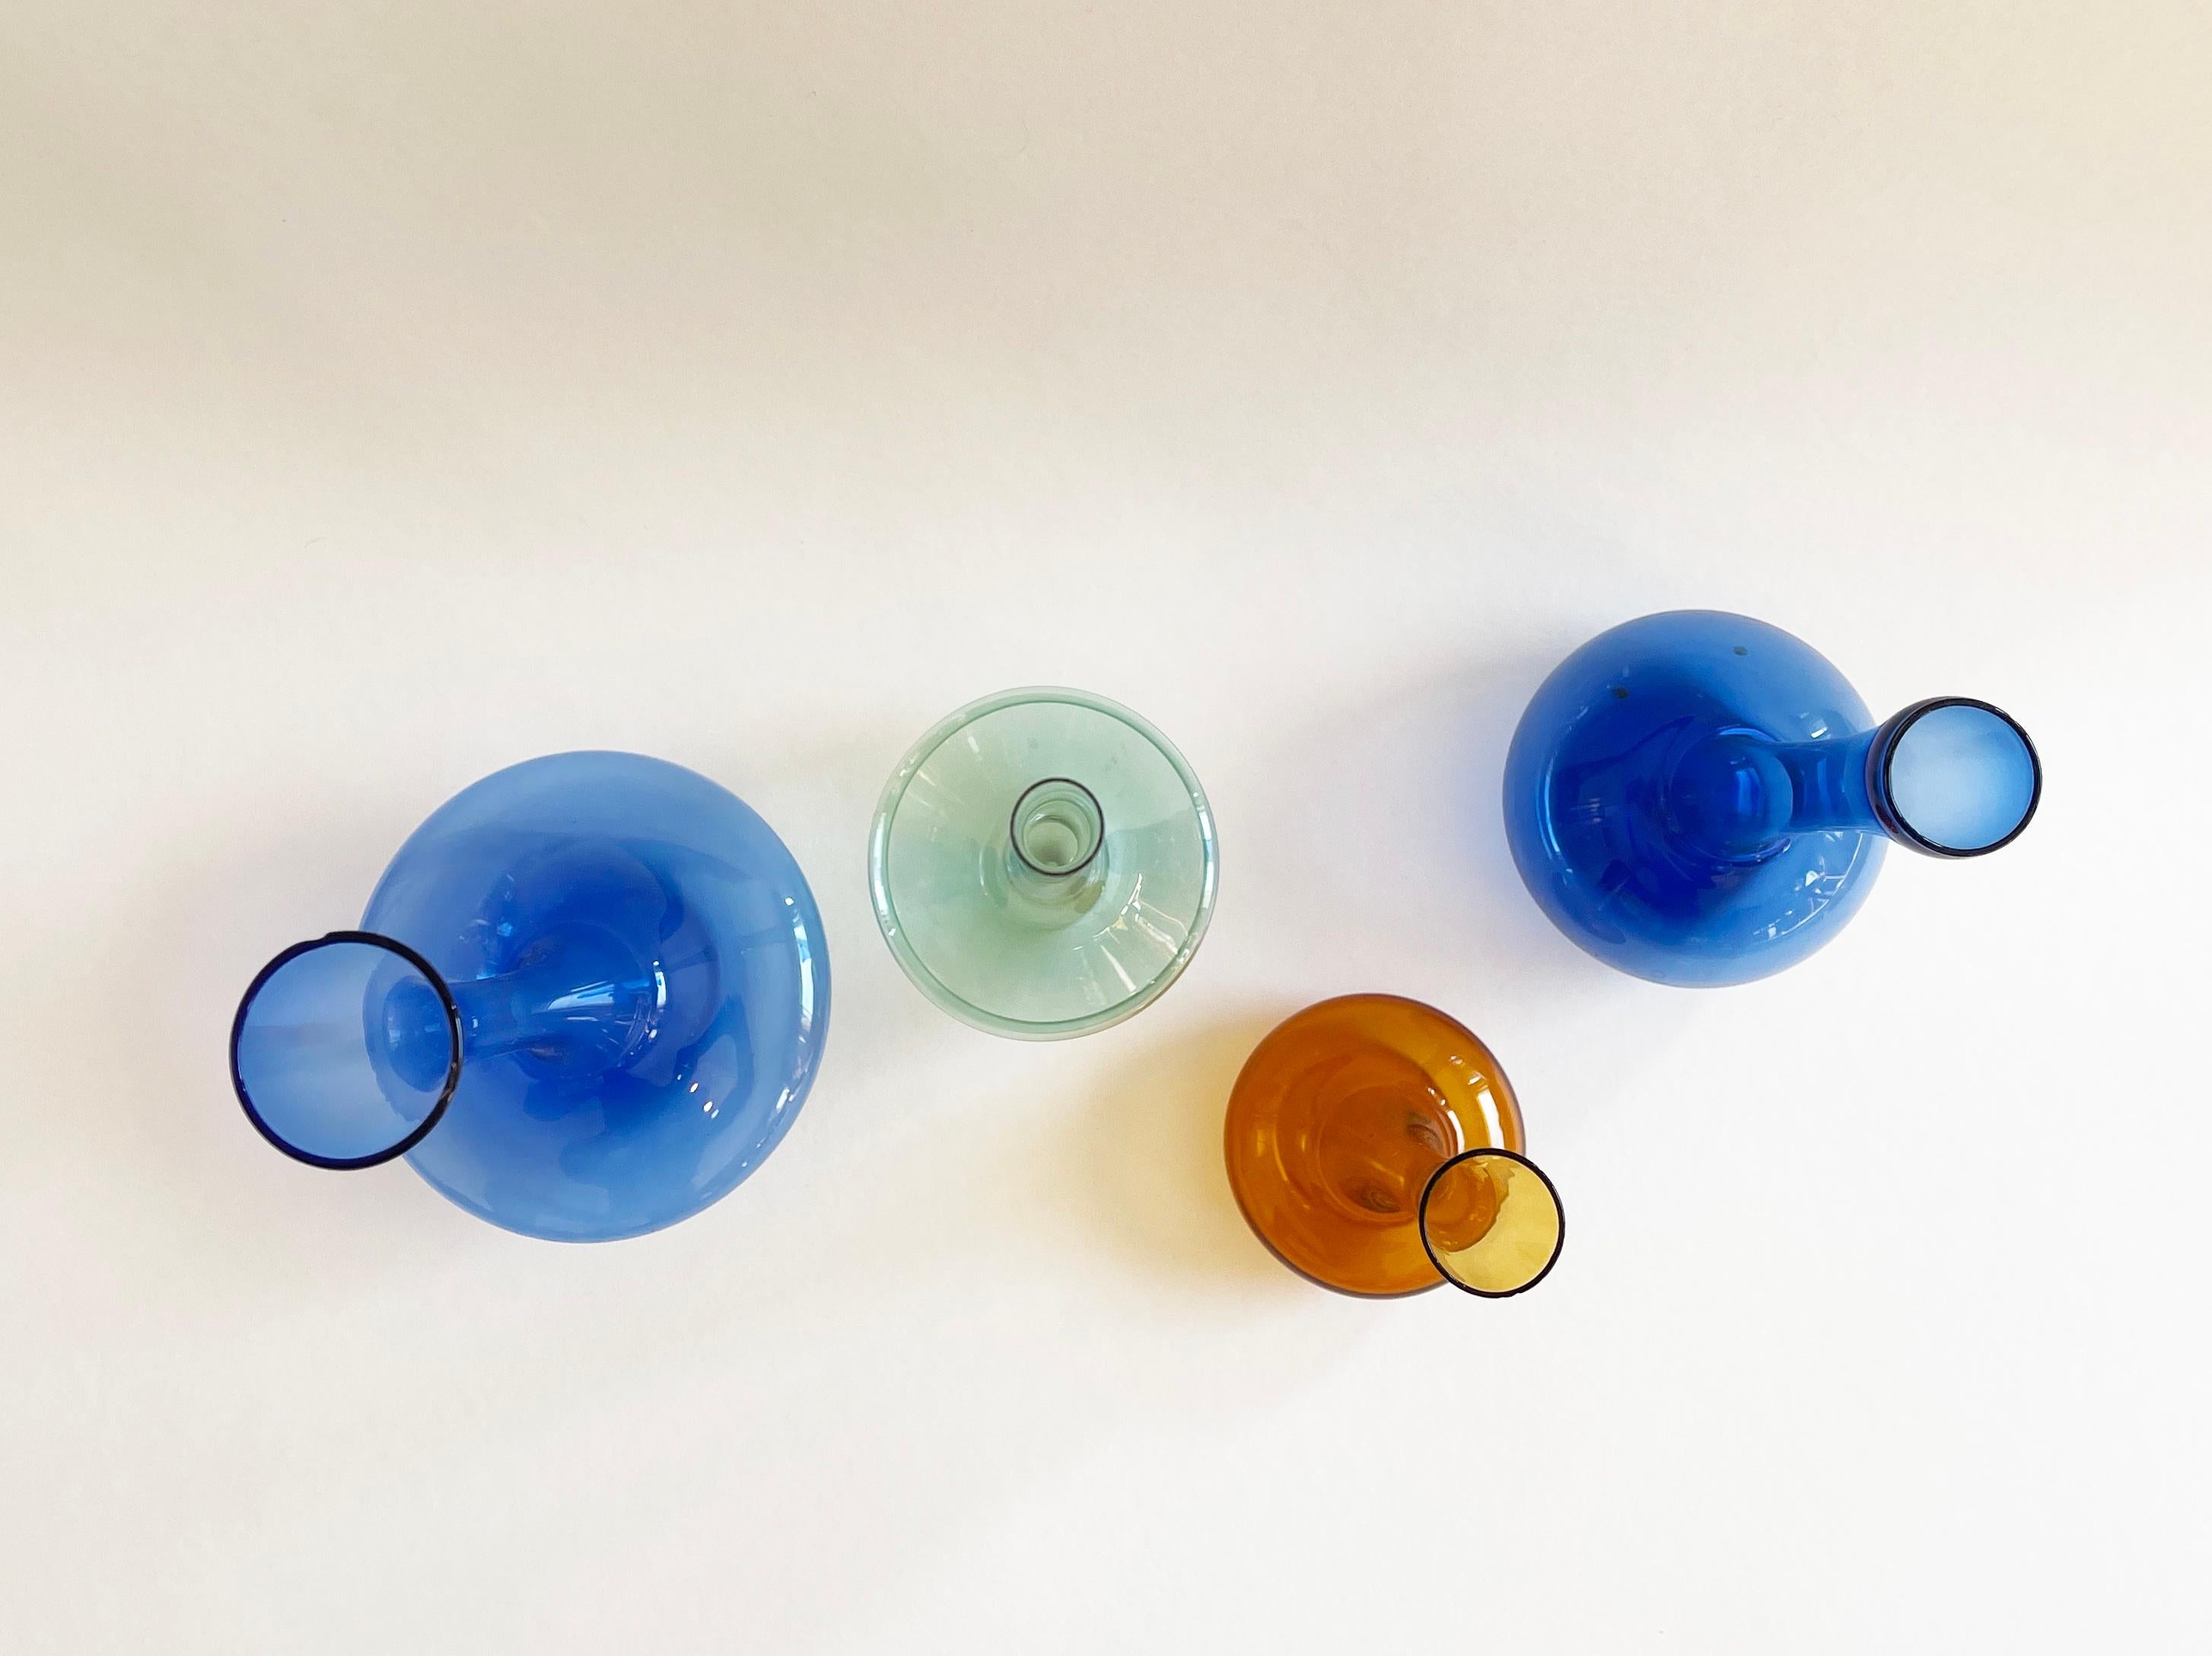 Collection of four very delicate glass vases, all attributed to Albin Schädel, well known East German glass blower.
This skilled artist created the most delicate objects from very thin glass.
Here as a matter of fact part of my family inheritance: